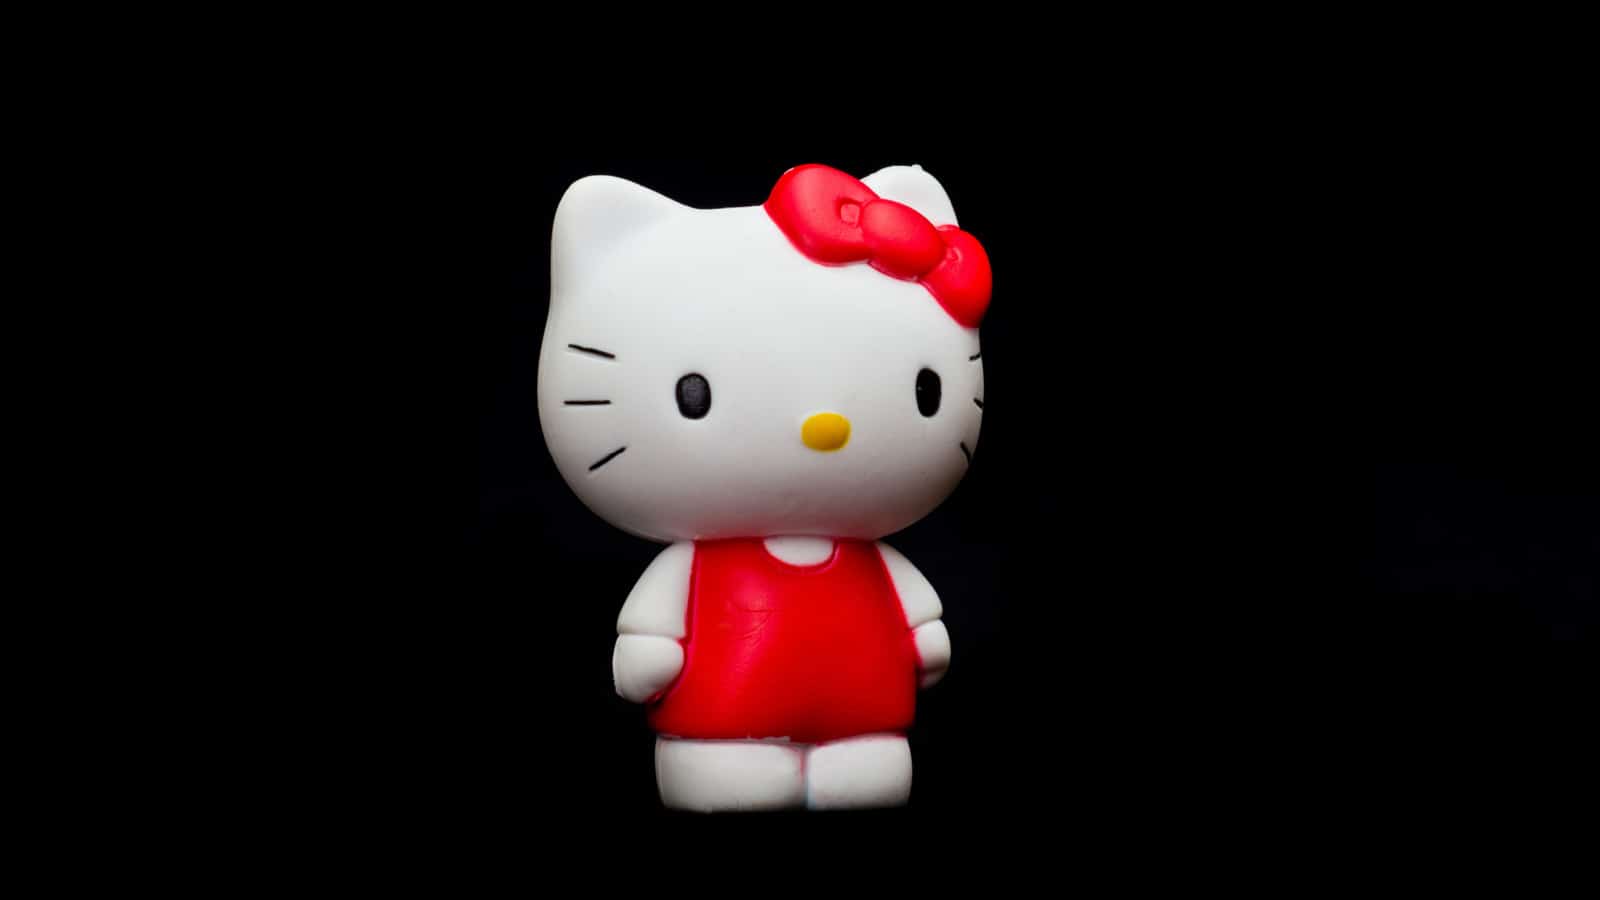 Hello Kitty do our loved ones in heaven remember us